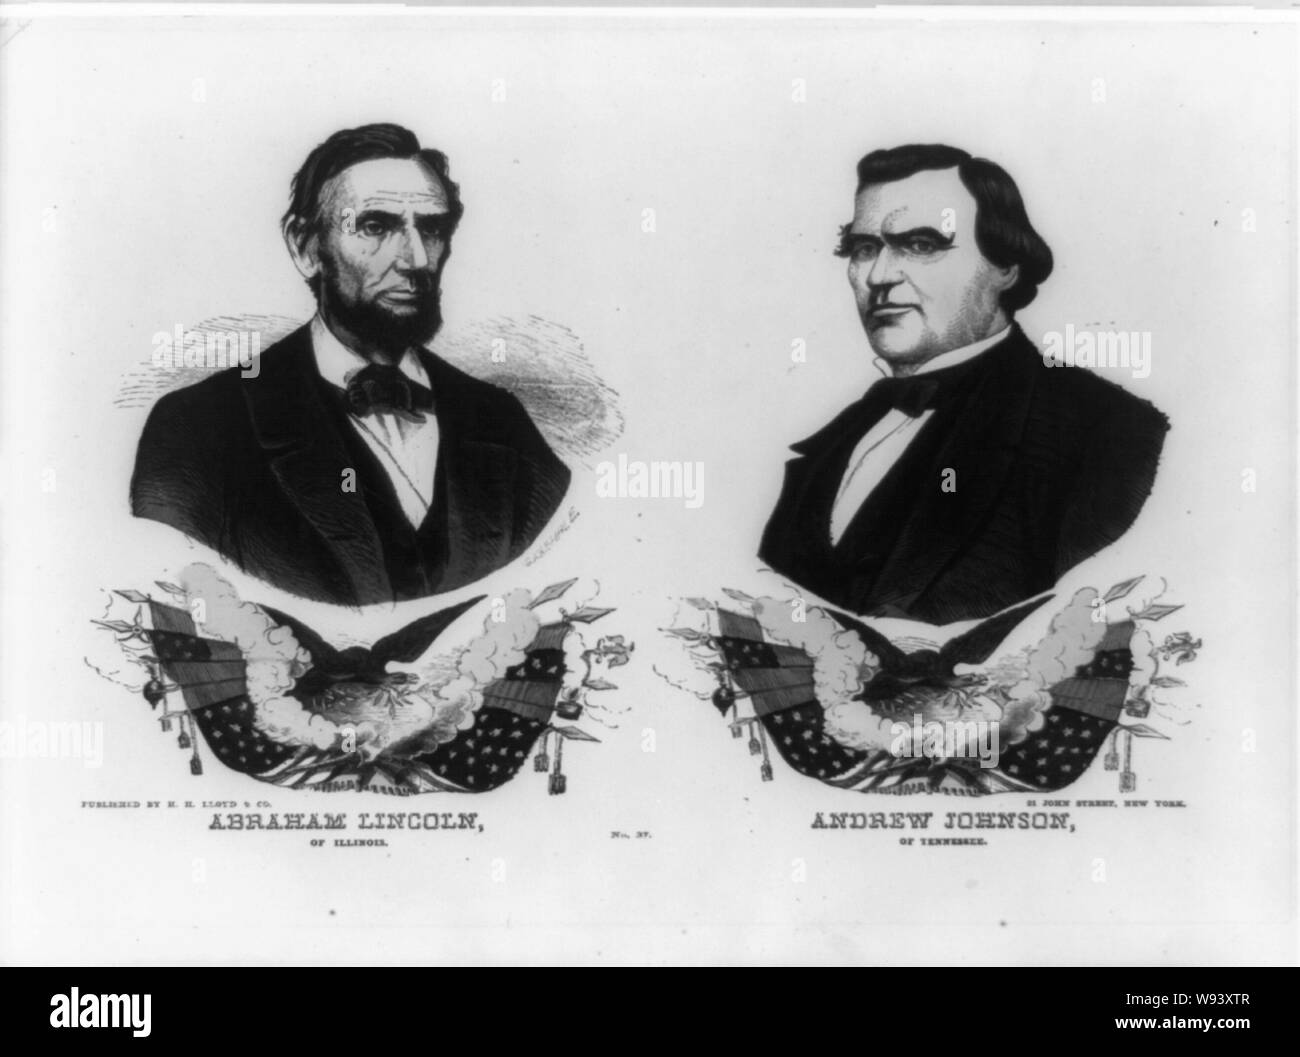 Abraham Lincoln of Illinois. Andrew Johnson of Tennessee. No. 37 Abstract: Print shows a campaign banner for the Republican ticket in the 1864 presidential election. It consists of facing bust portraits of Abraham Lincoln (left) and Andrew Johnson (right). Below each portrait is an identical emblematic vignette of an eagle holding lightning bolts and an olive branch and surrounded by flags and banners. Torches are visible below the eagle, alternating with flagstaffs. Stock Photo